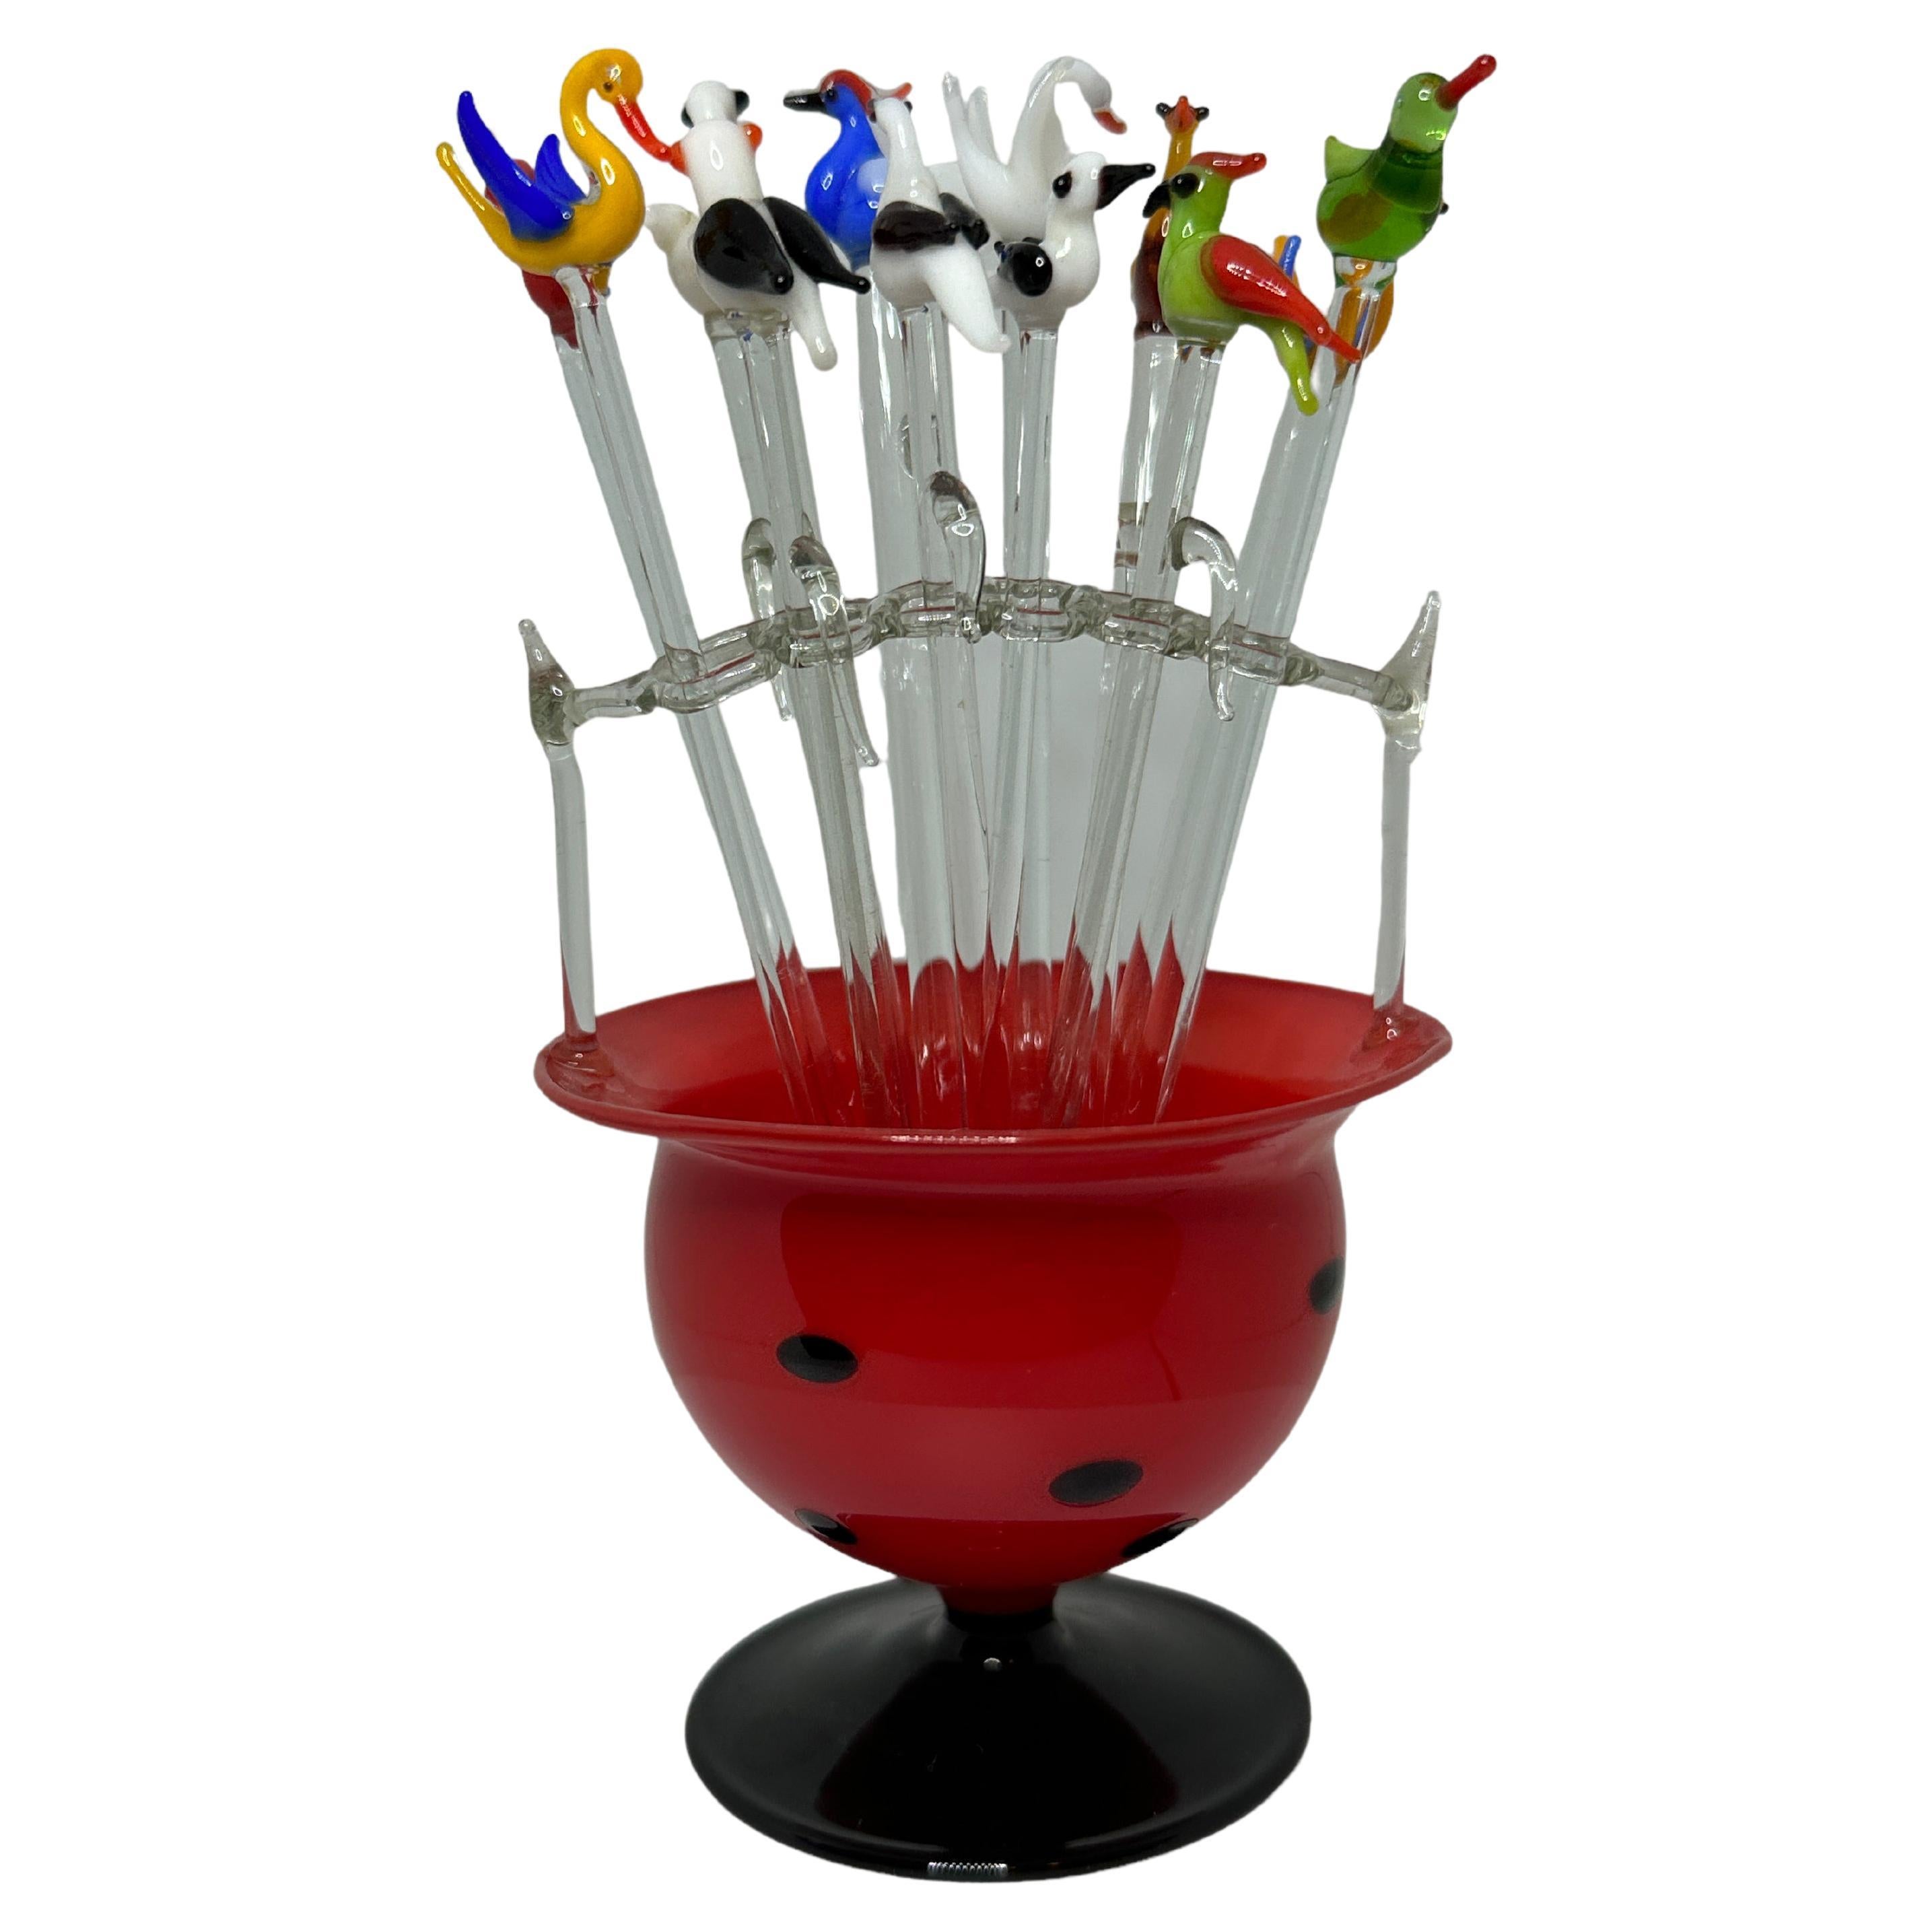 Classic early 1920s Austrian cocktail picks made of glass, showing different birds in a mouth blown glass stand. The total high is approx. 5.13 inches. The Stand itself is approx. 3.5